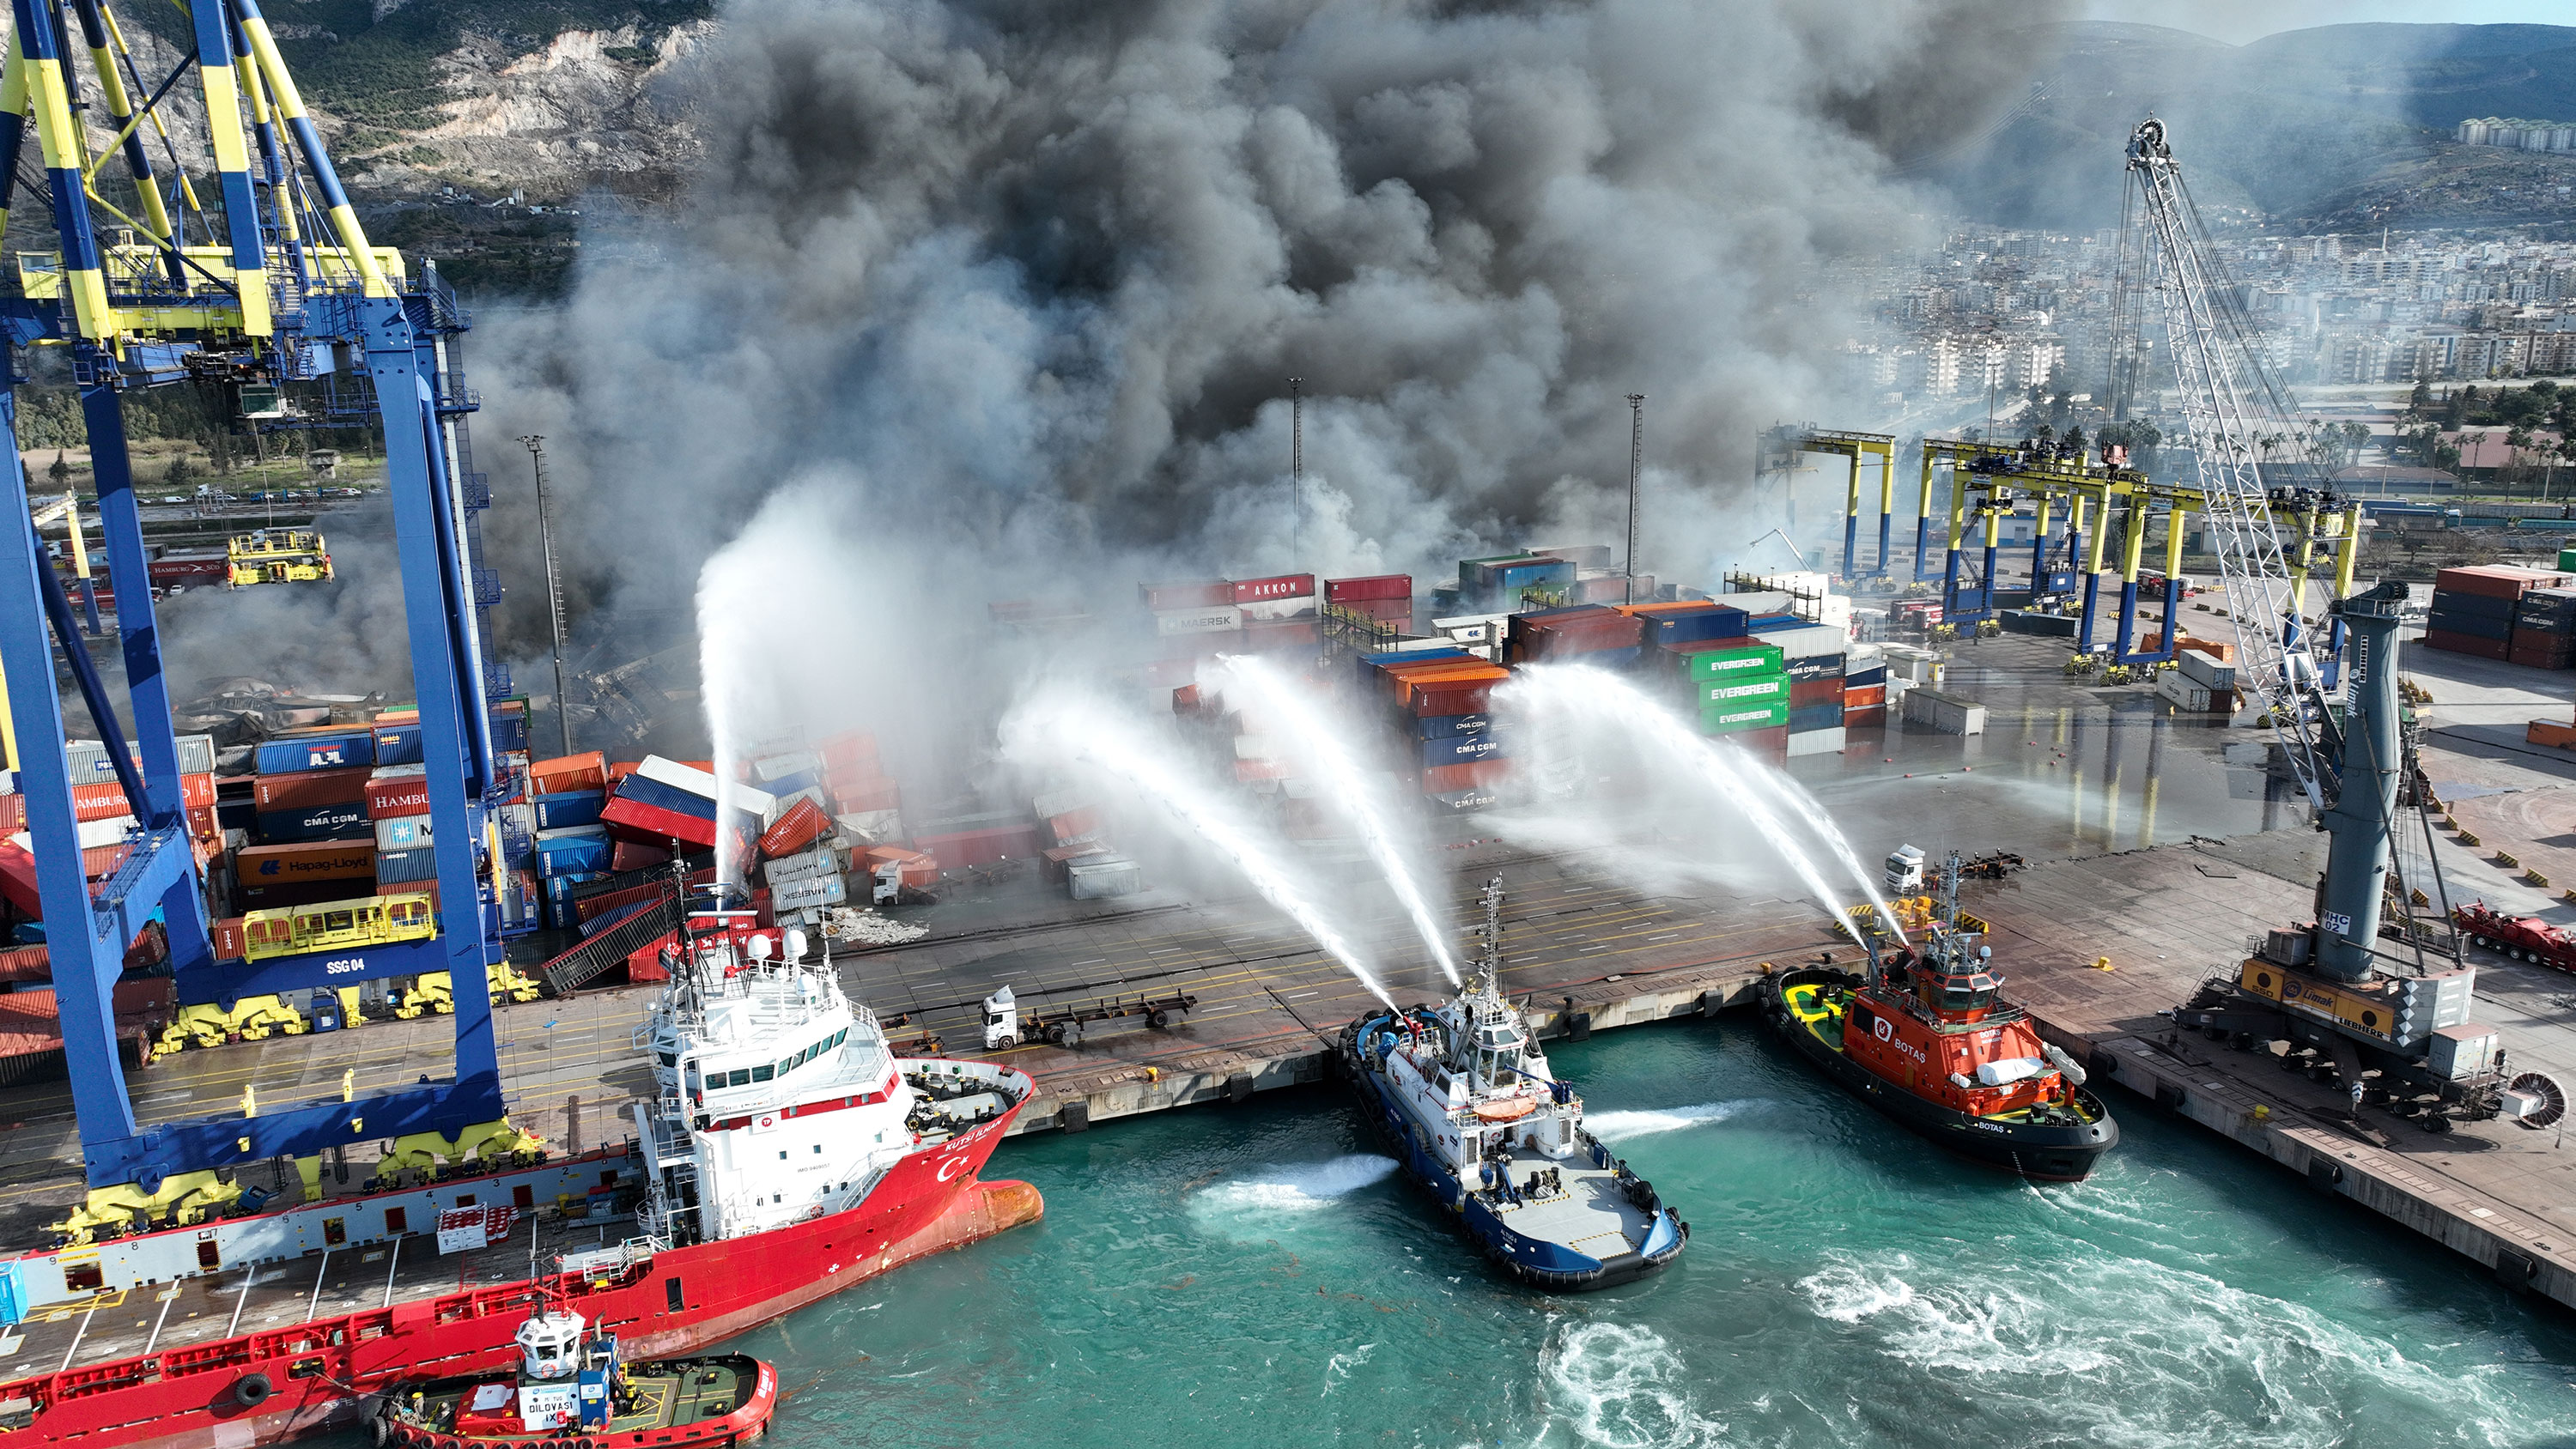 Firefighting ships attempt to extinguish the fire on Wednesday.